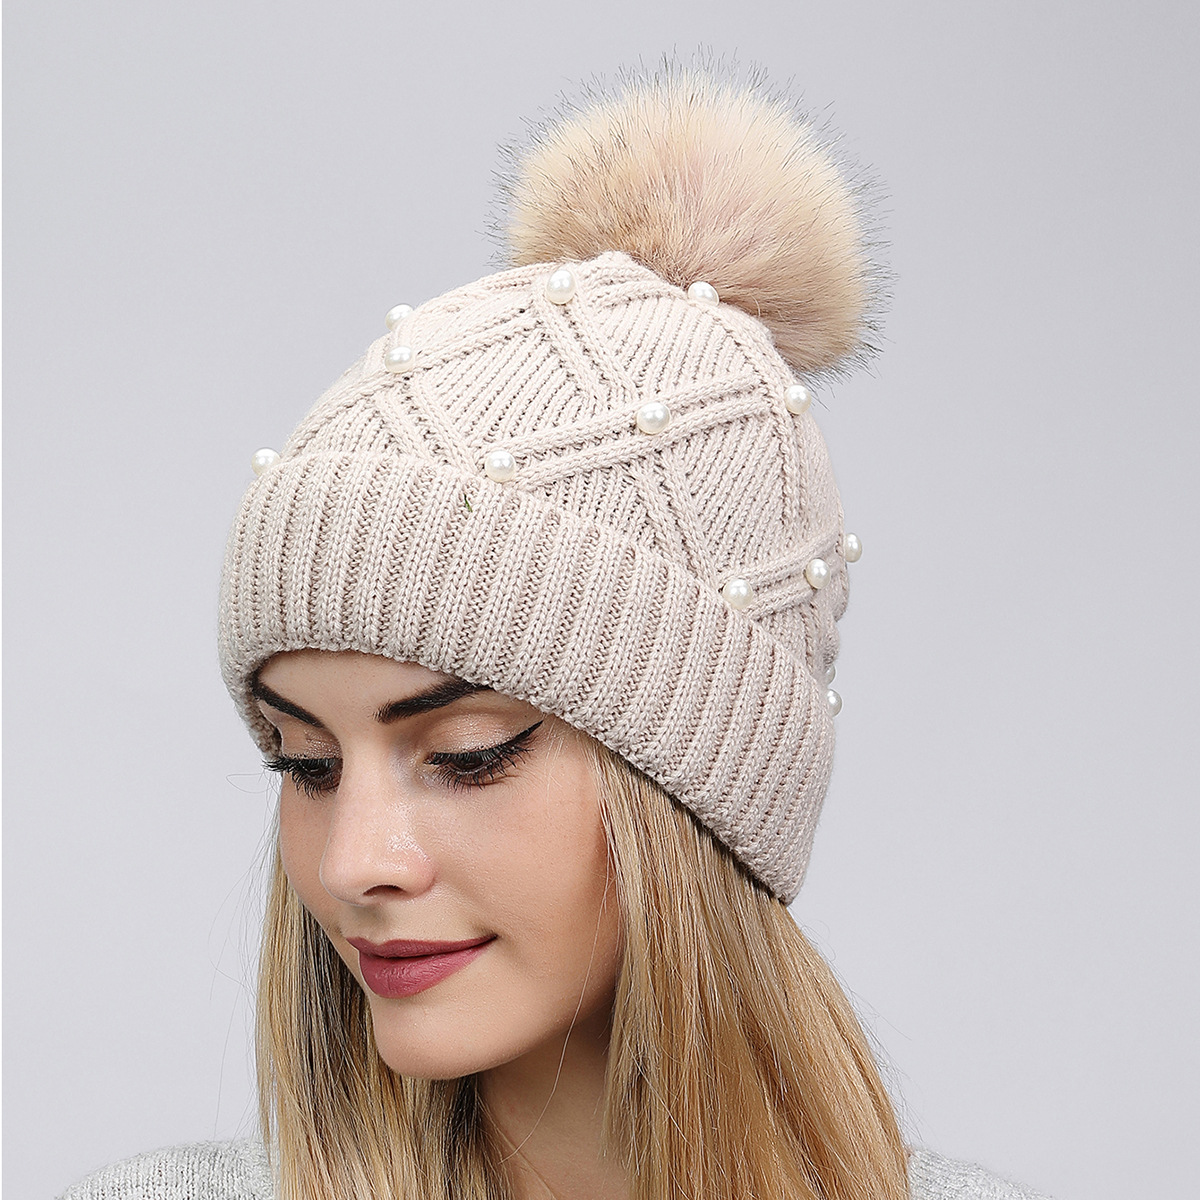 New Women's Woolen Knitted Hat Korean Style Autumn and Winter Warm Fluffy Ball Cap Thickened All-Matching Face Slimming Travel Hat Wholesale